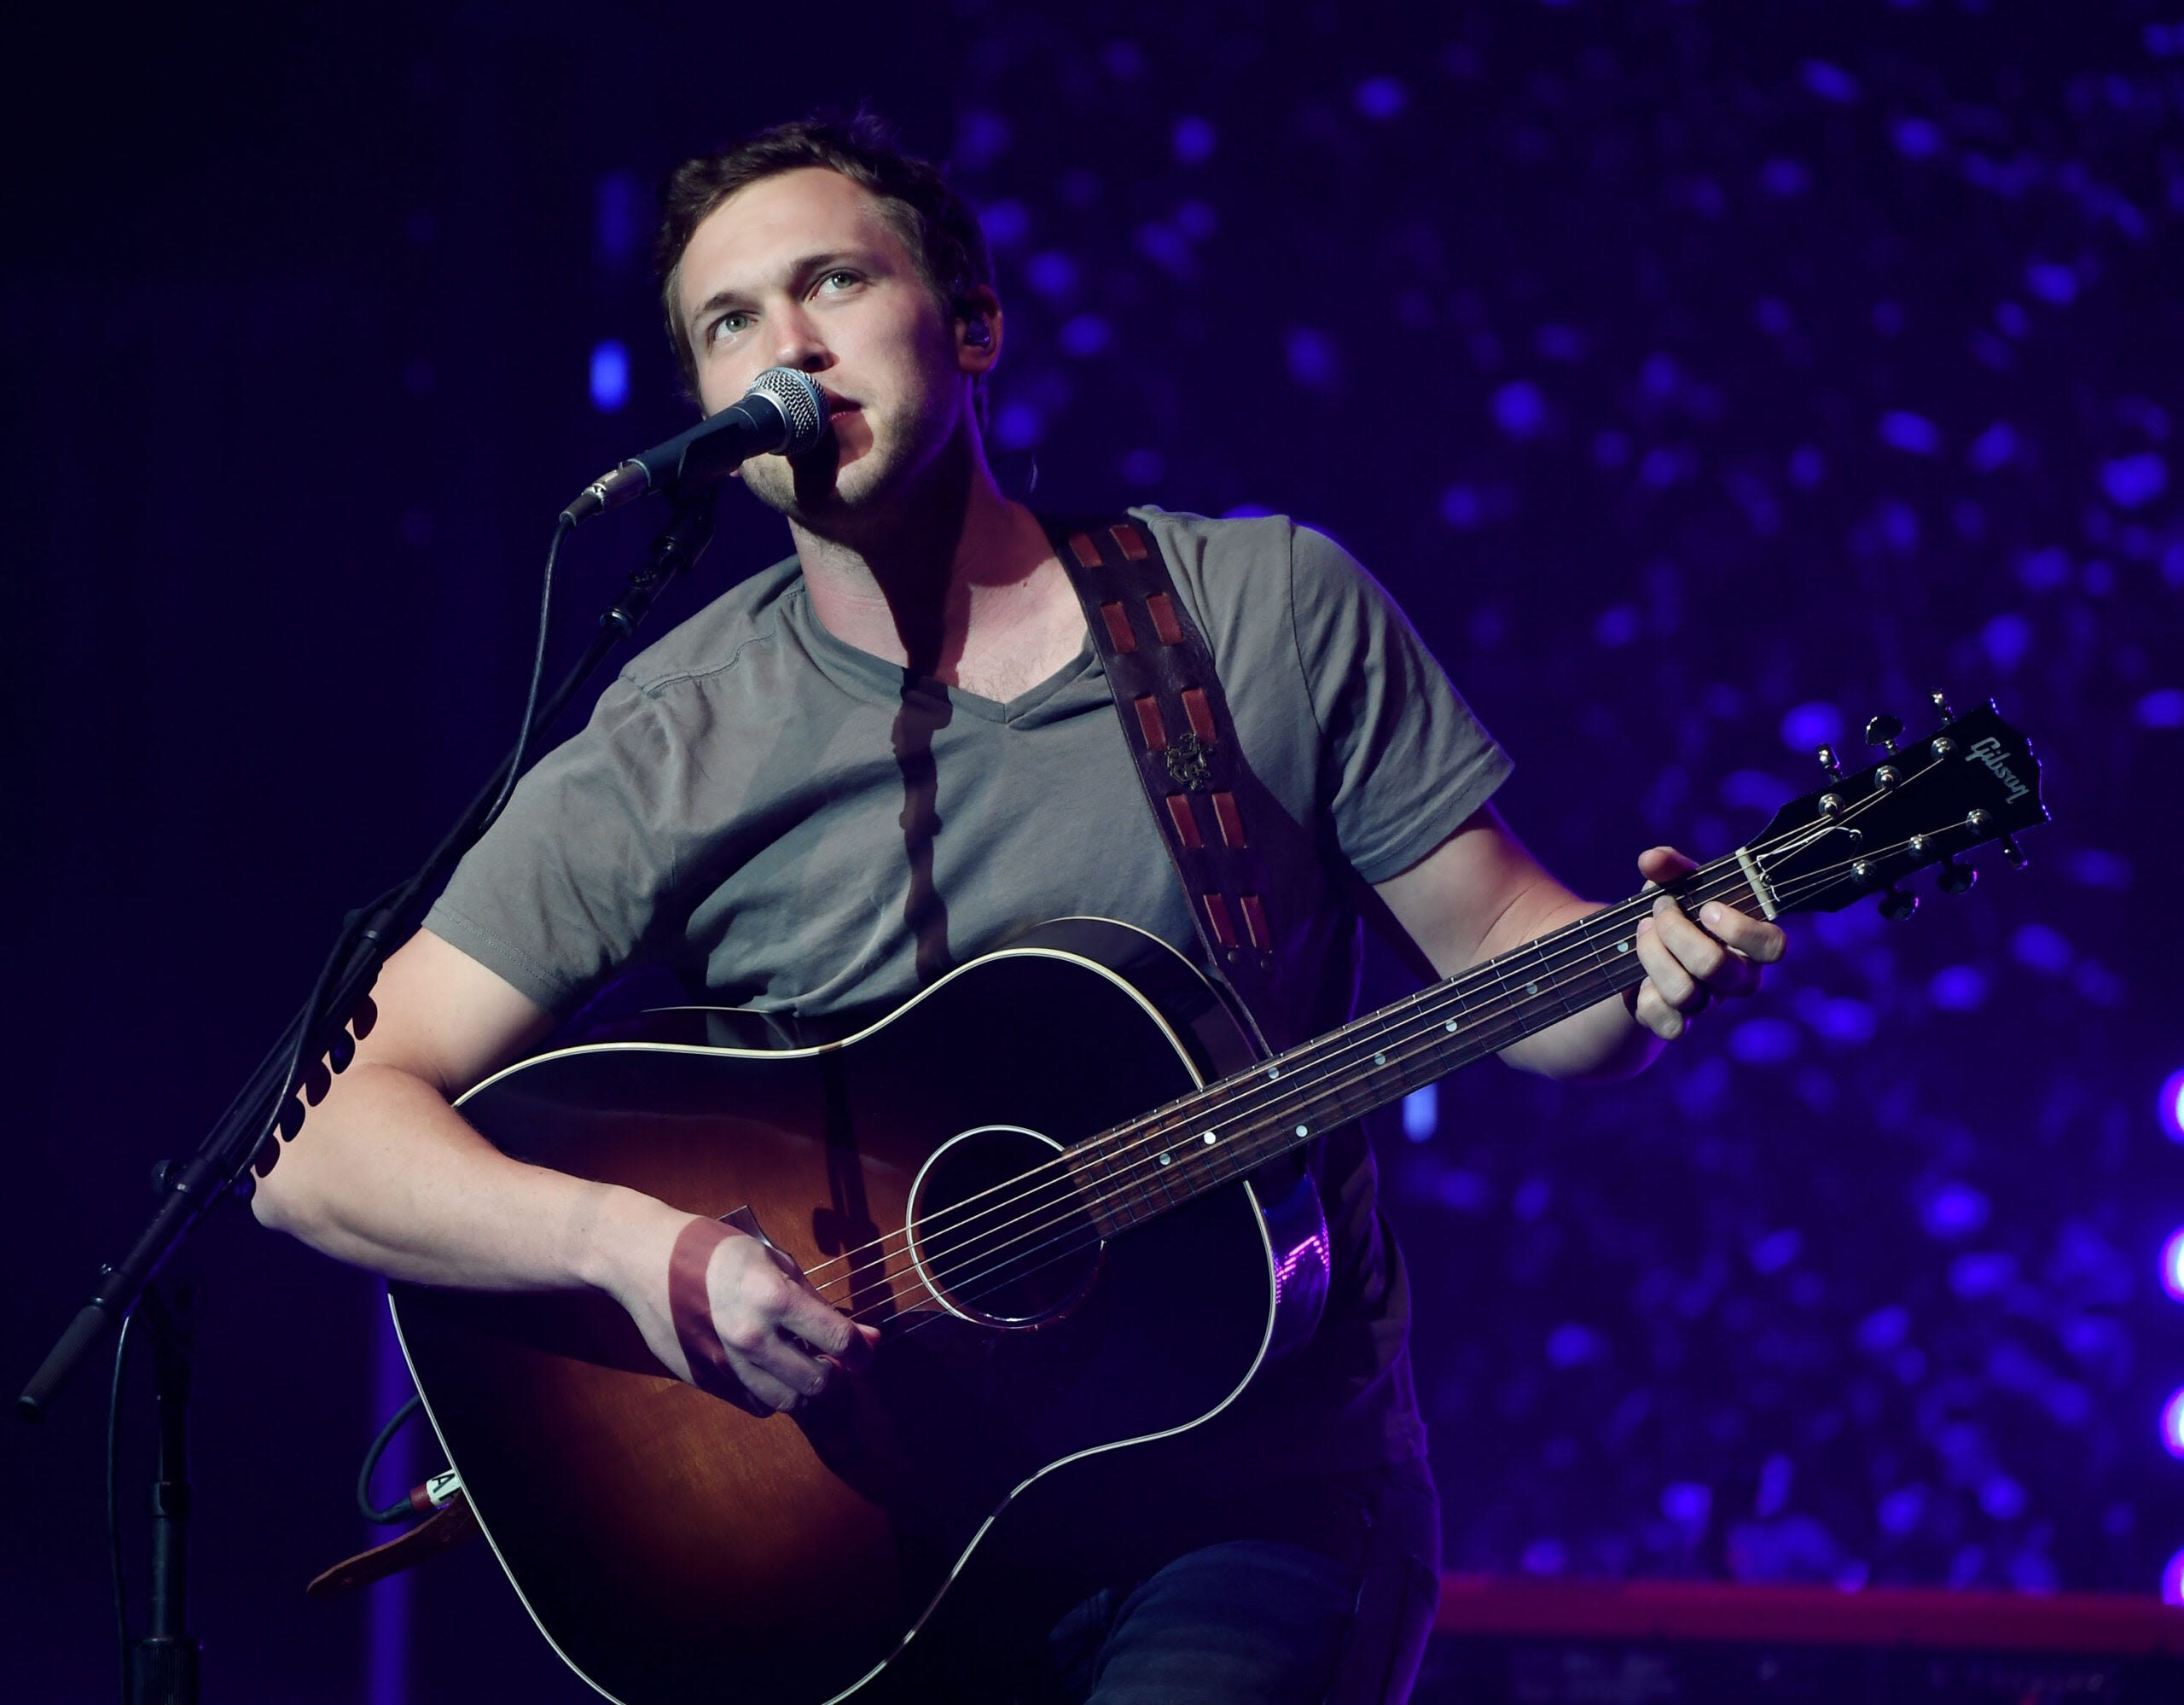 Phillip Phillips to perform 'God Bless America' ahead of Indy 500